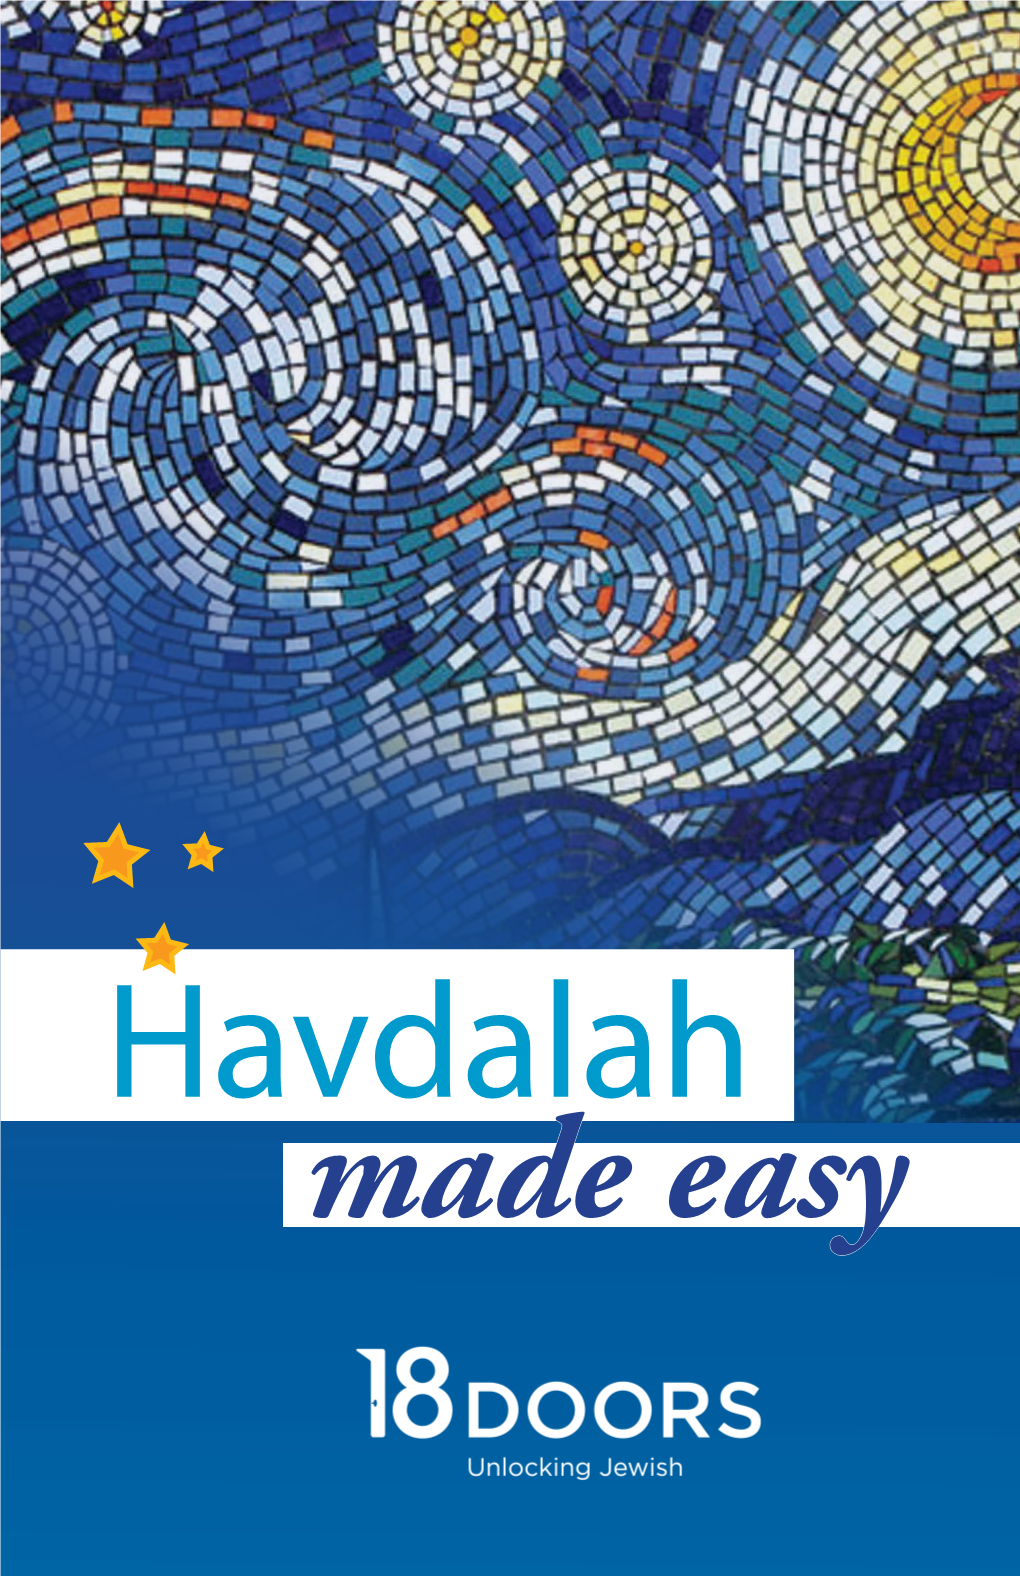 Havdalah Made Easy Havdalah Why a Braided Candle? the Blessing Refers to “Lights of Fire.” the Braided Candle Gives Us Several Wicks to Represent Those Lights